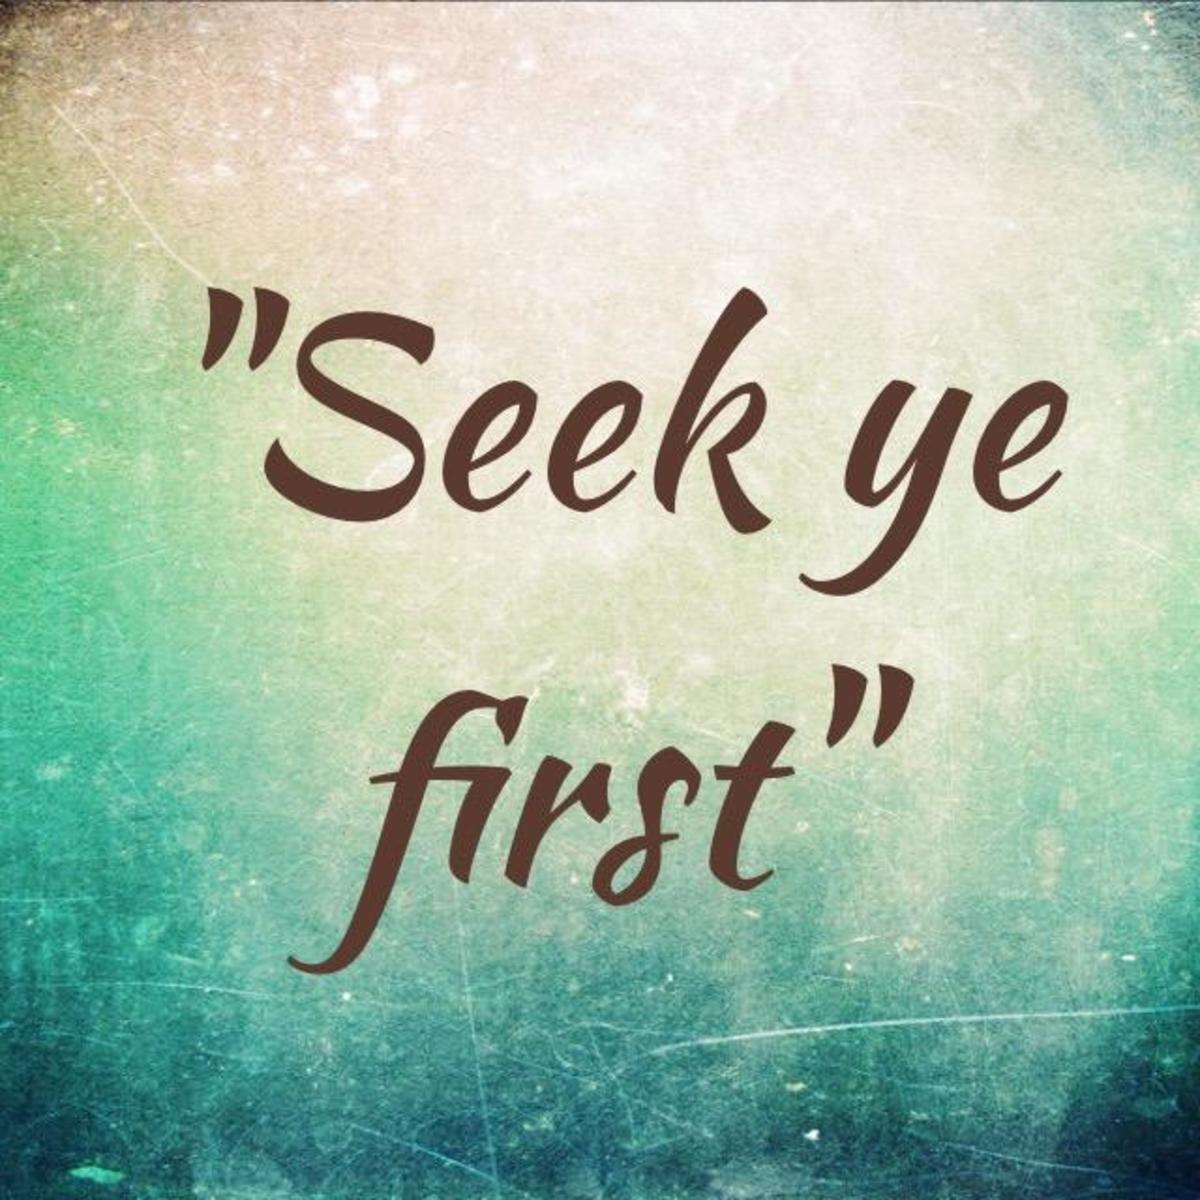 What does the "Seek ye first" verse really mean in the Bible?